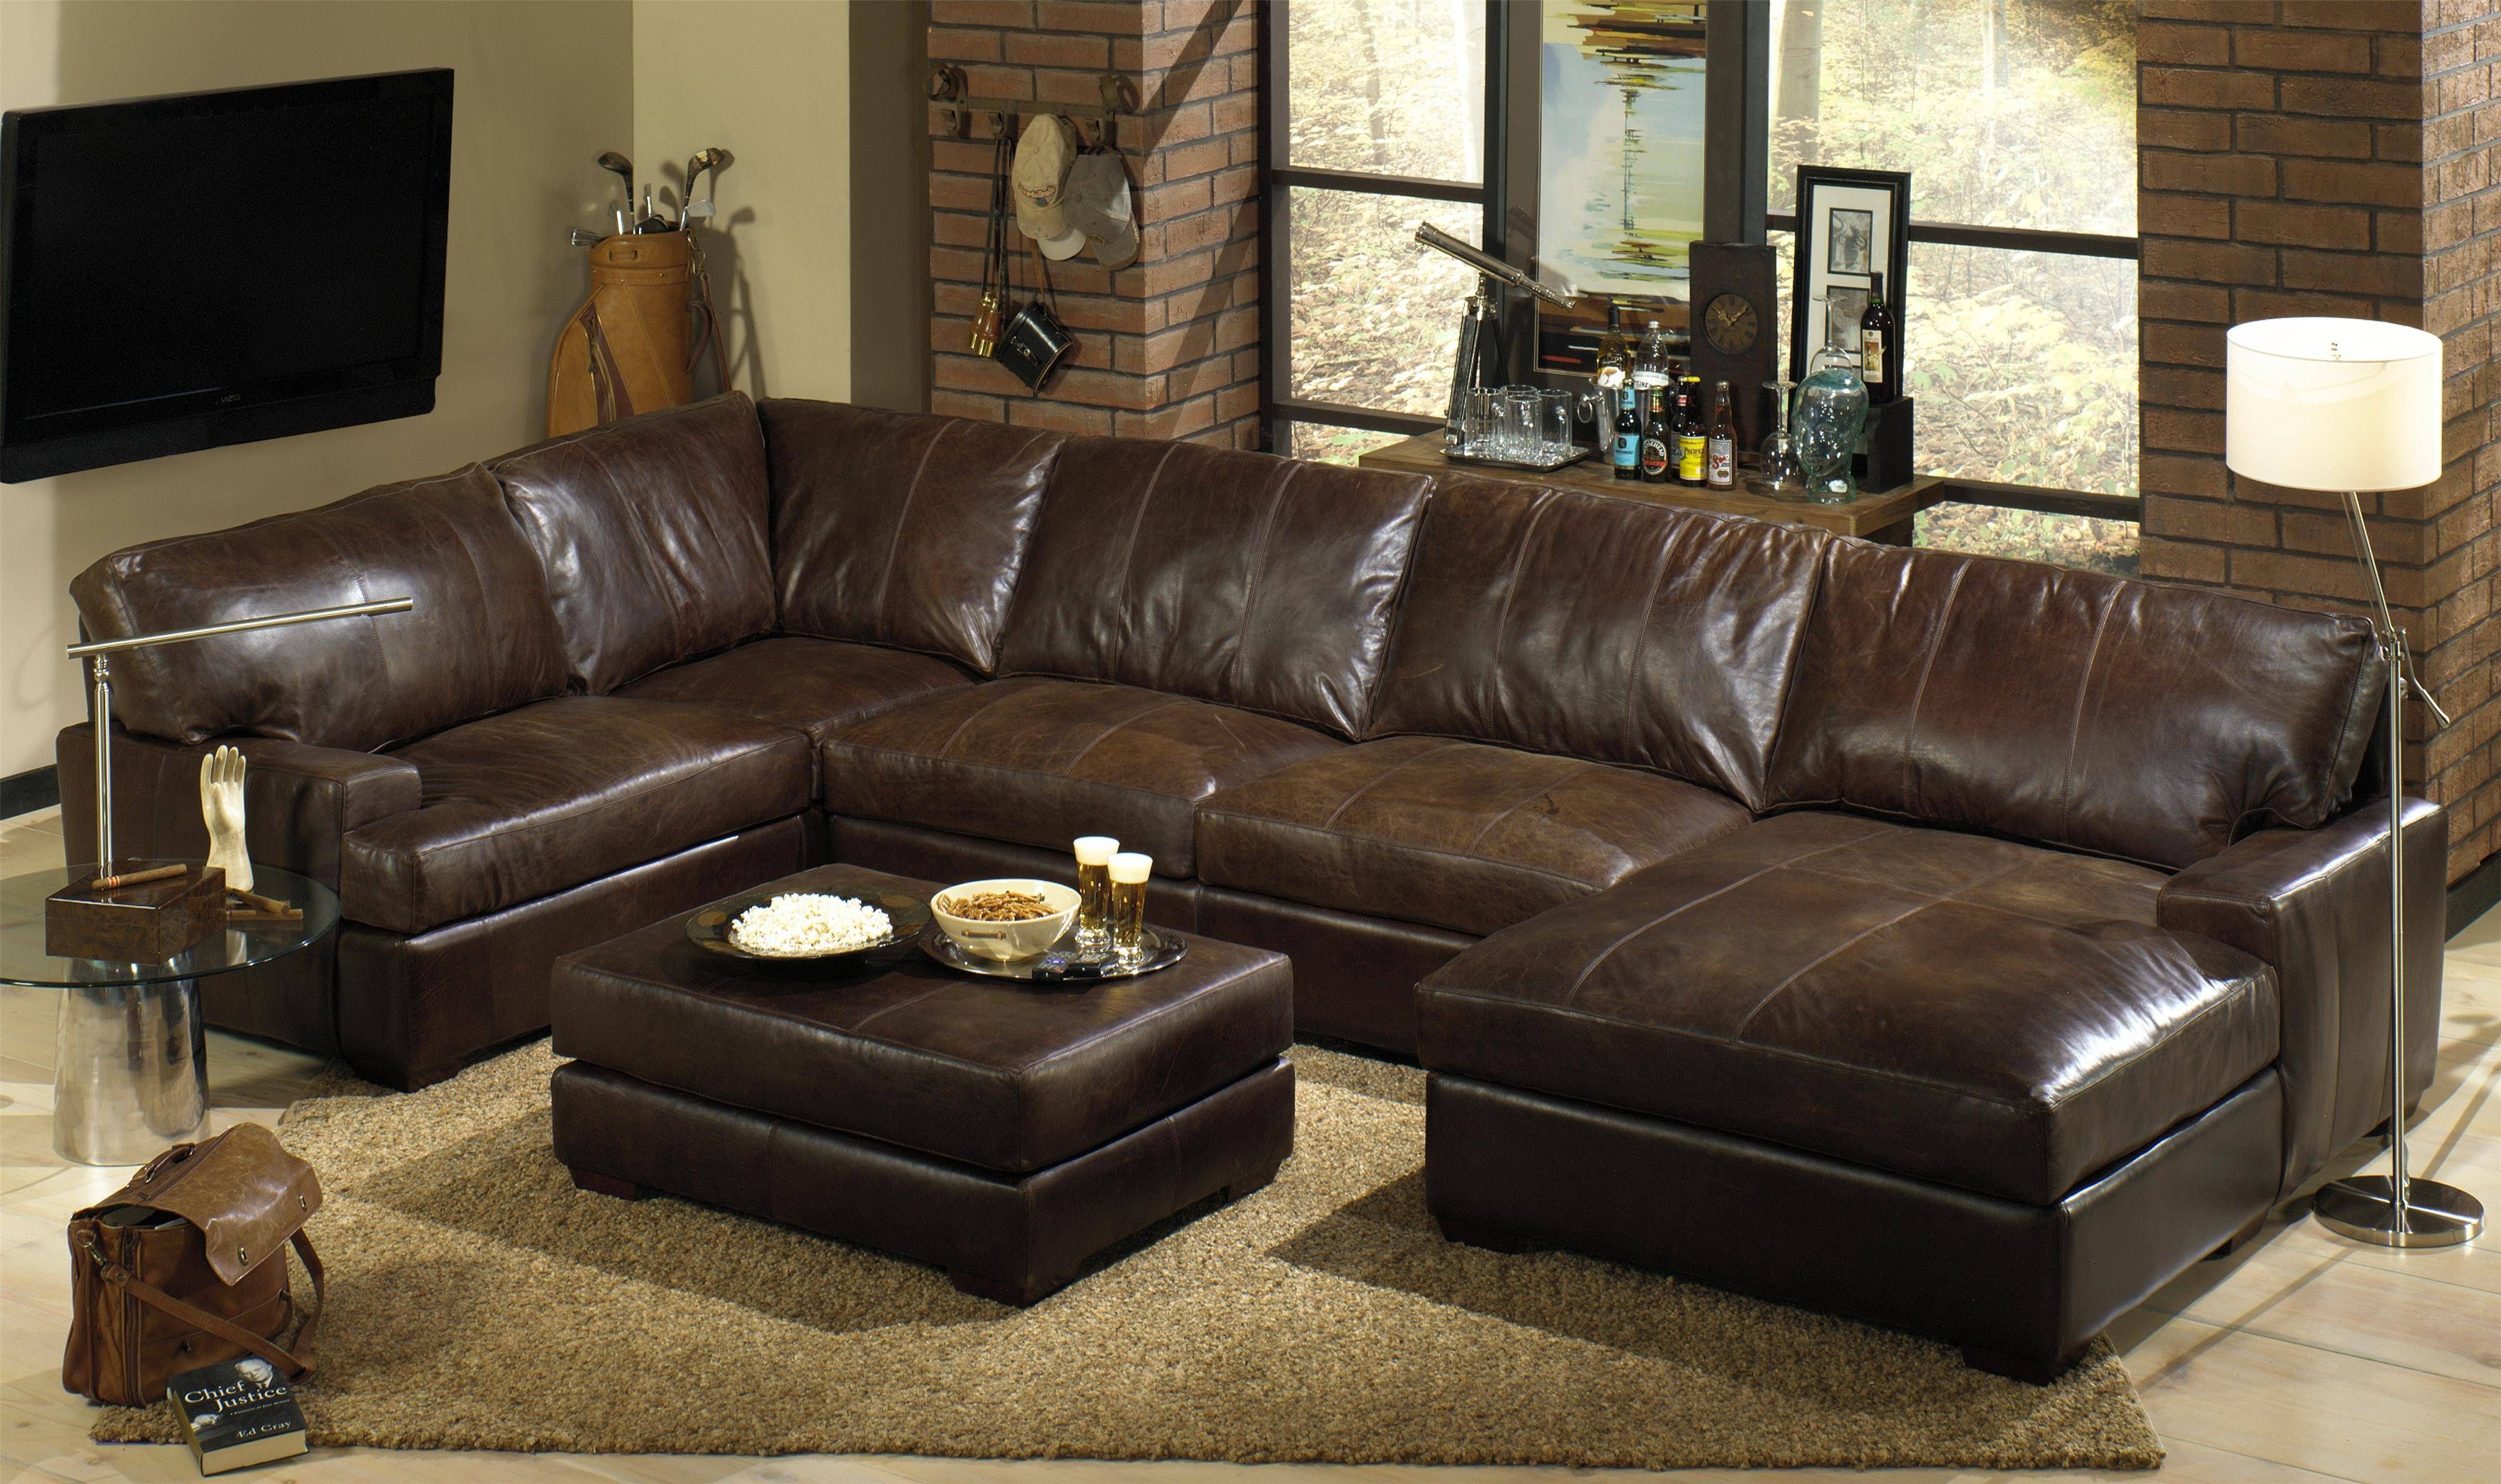 Stunning 6 Piece Leather Sectional Sofa 68 For Your Sectional Throughout Leather Sectional Sofas Toronto (View 10 of 25)